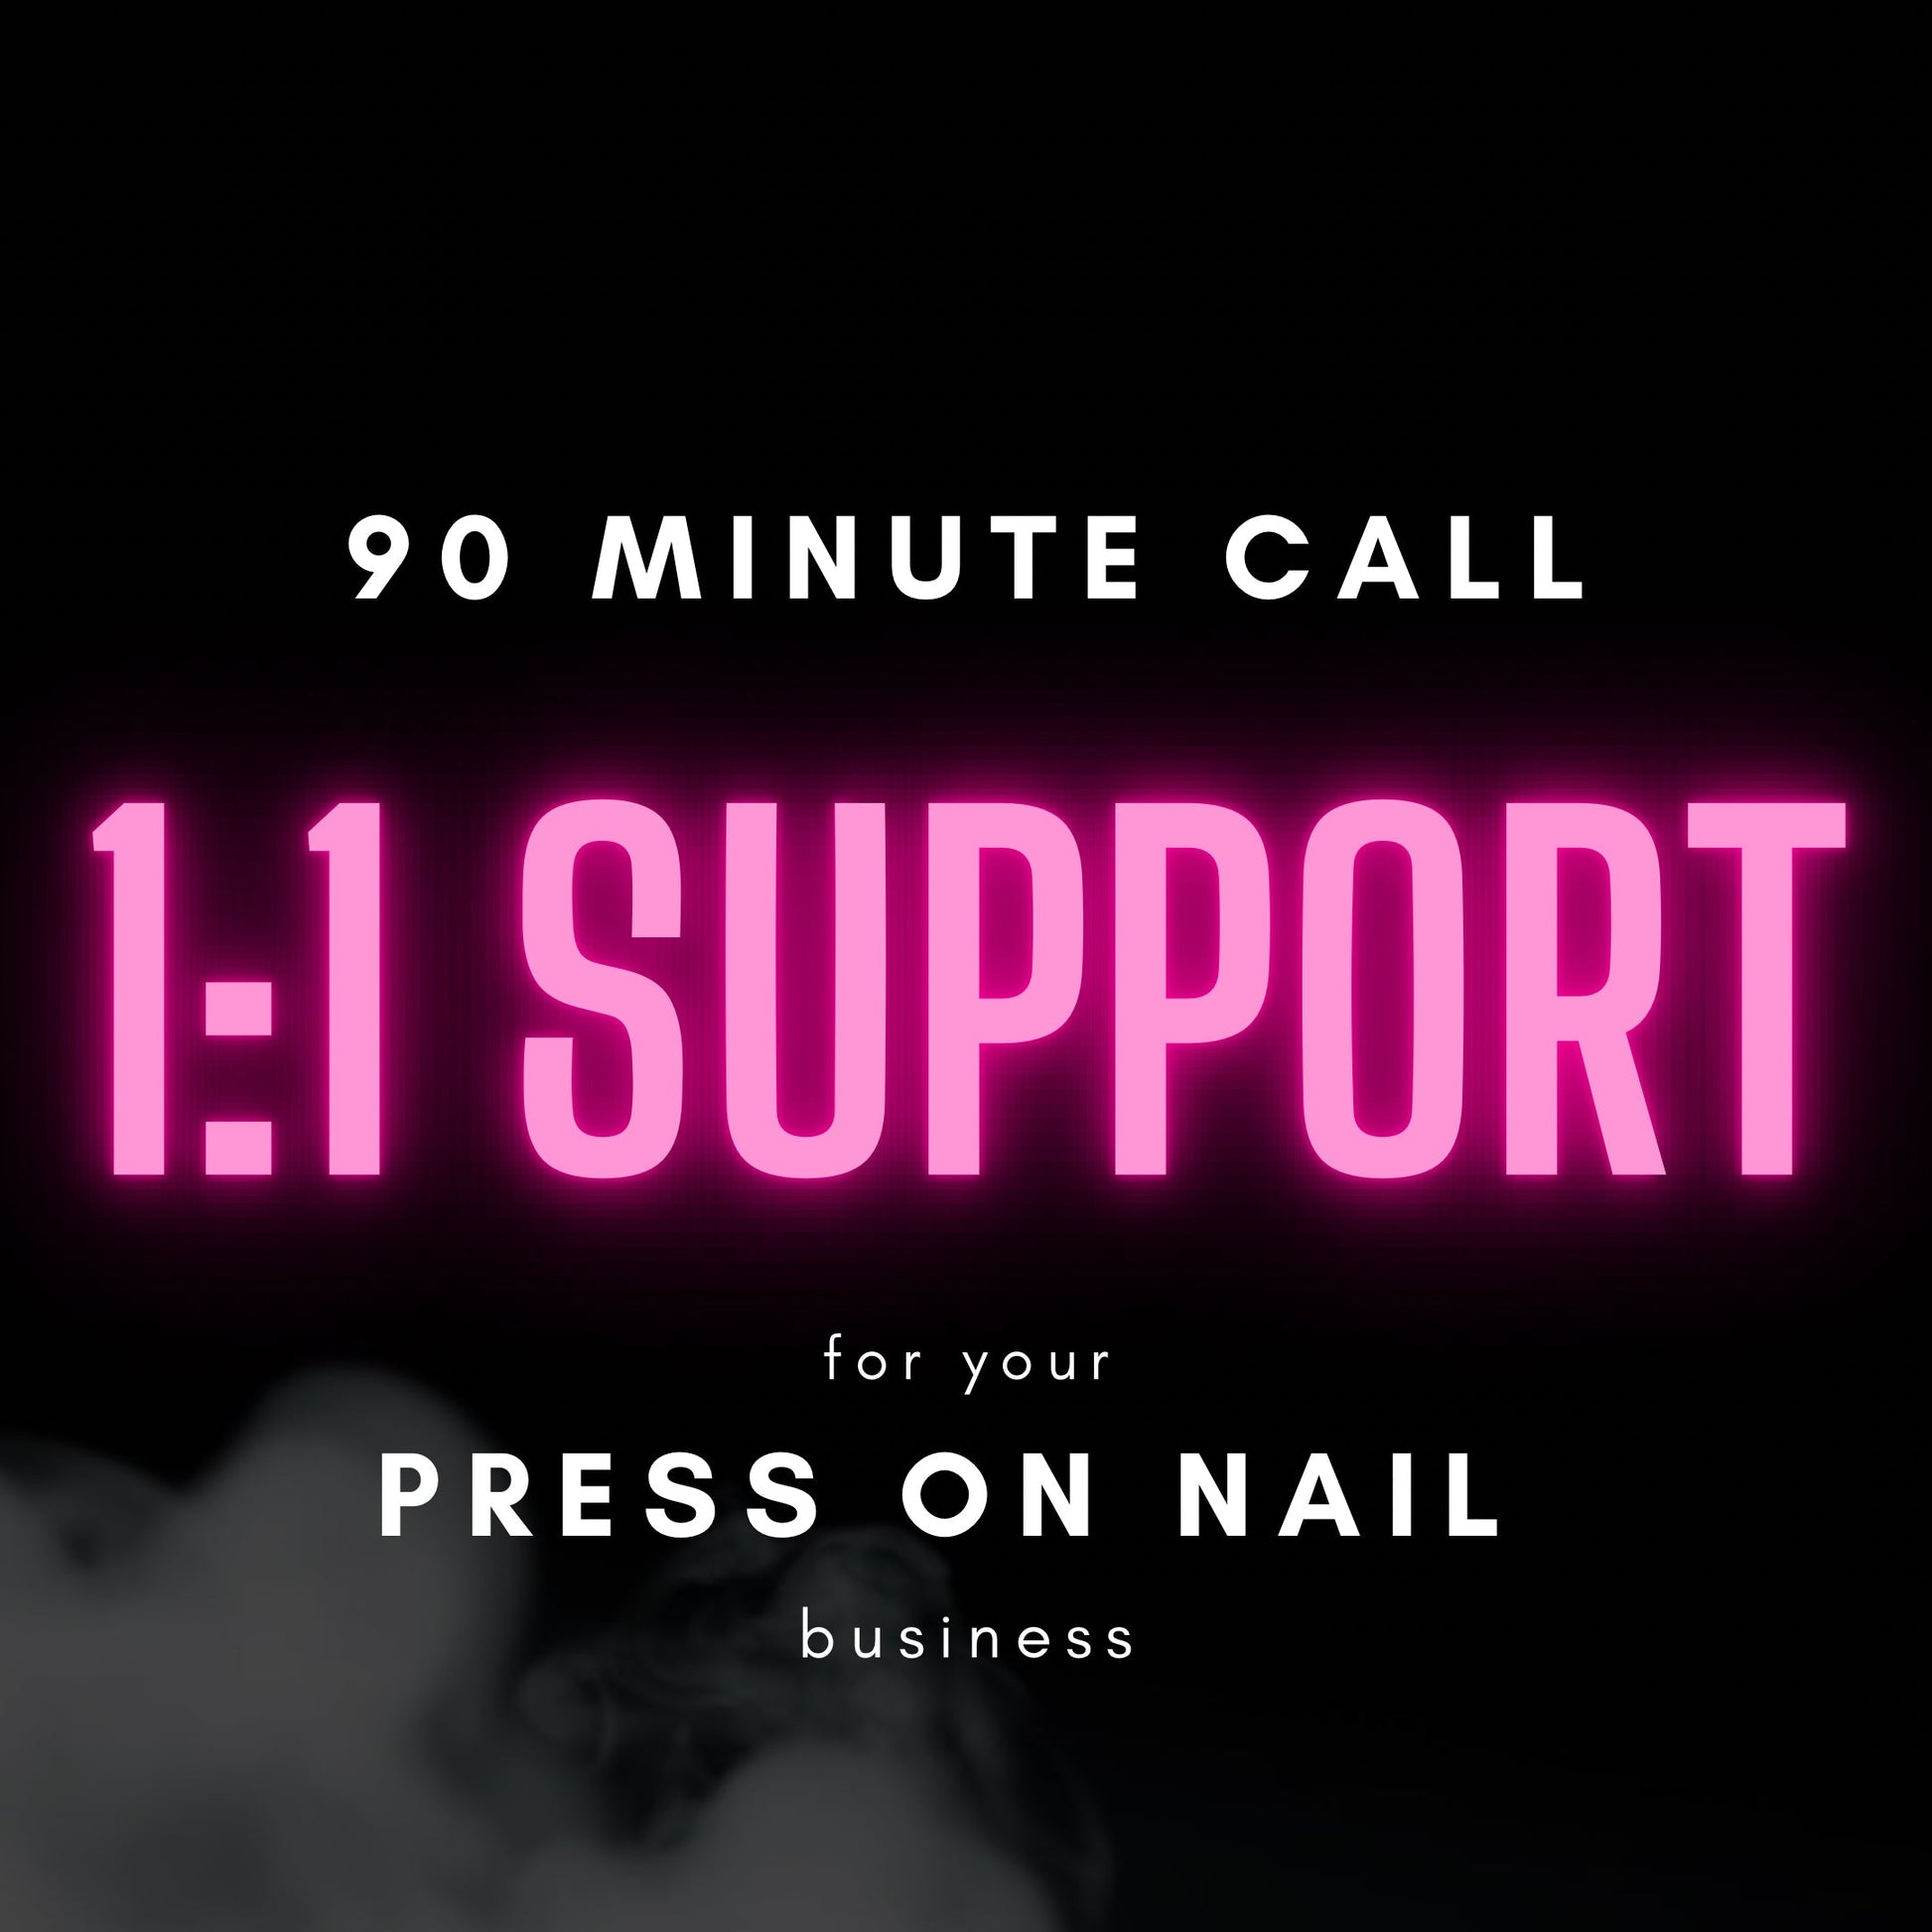 Start Press On Nail Business - Mentor Support Call